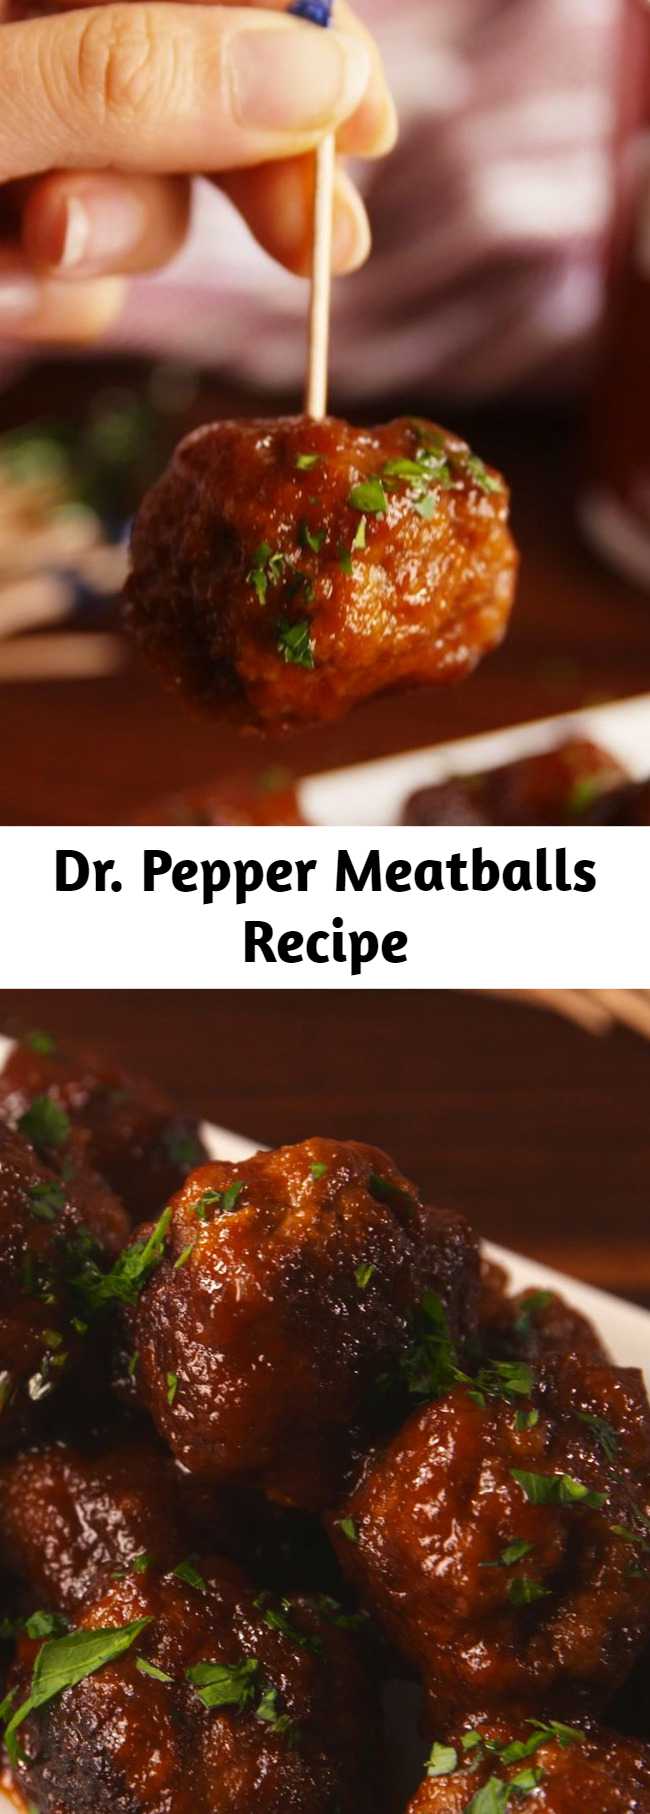 Dr. Pepper Meatballs Recipe - You'll be licking the sauce spoon, it's so good.